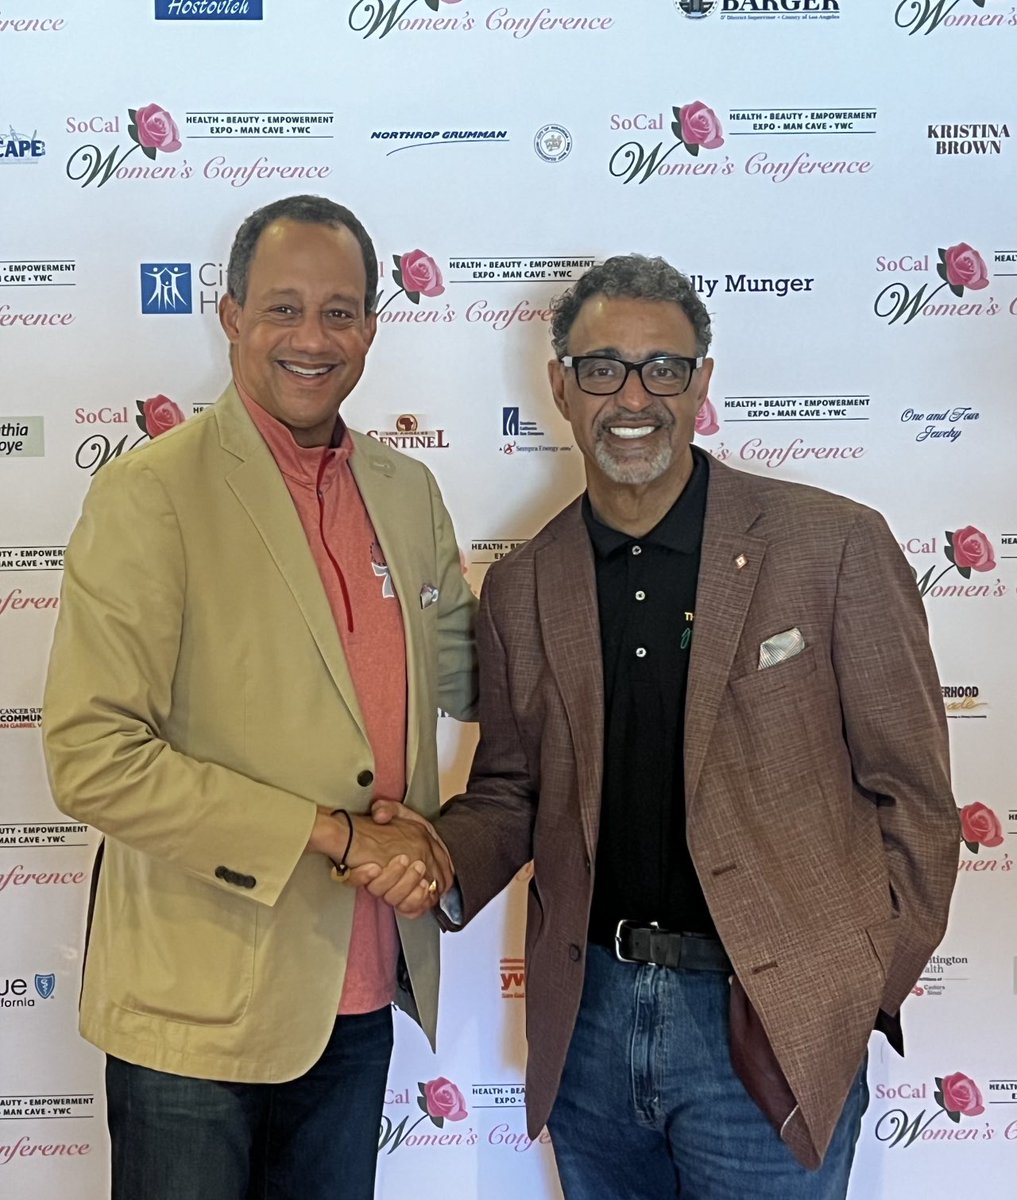 ⁦@BCrusade⁩ supports Danny Bakewell, Jr, 2024 Chair of The Hon. John J. Kennedy Man Cave of The SoCal Women’s Conference at The Westin Pasadena. The Man Cave featured speakers who directly discussed men’s health and wellness issues.#MENSHEALTH #LENAKENNEDY #LASENTINEL